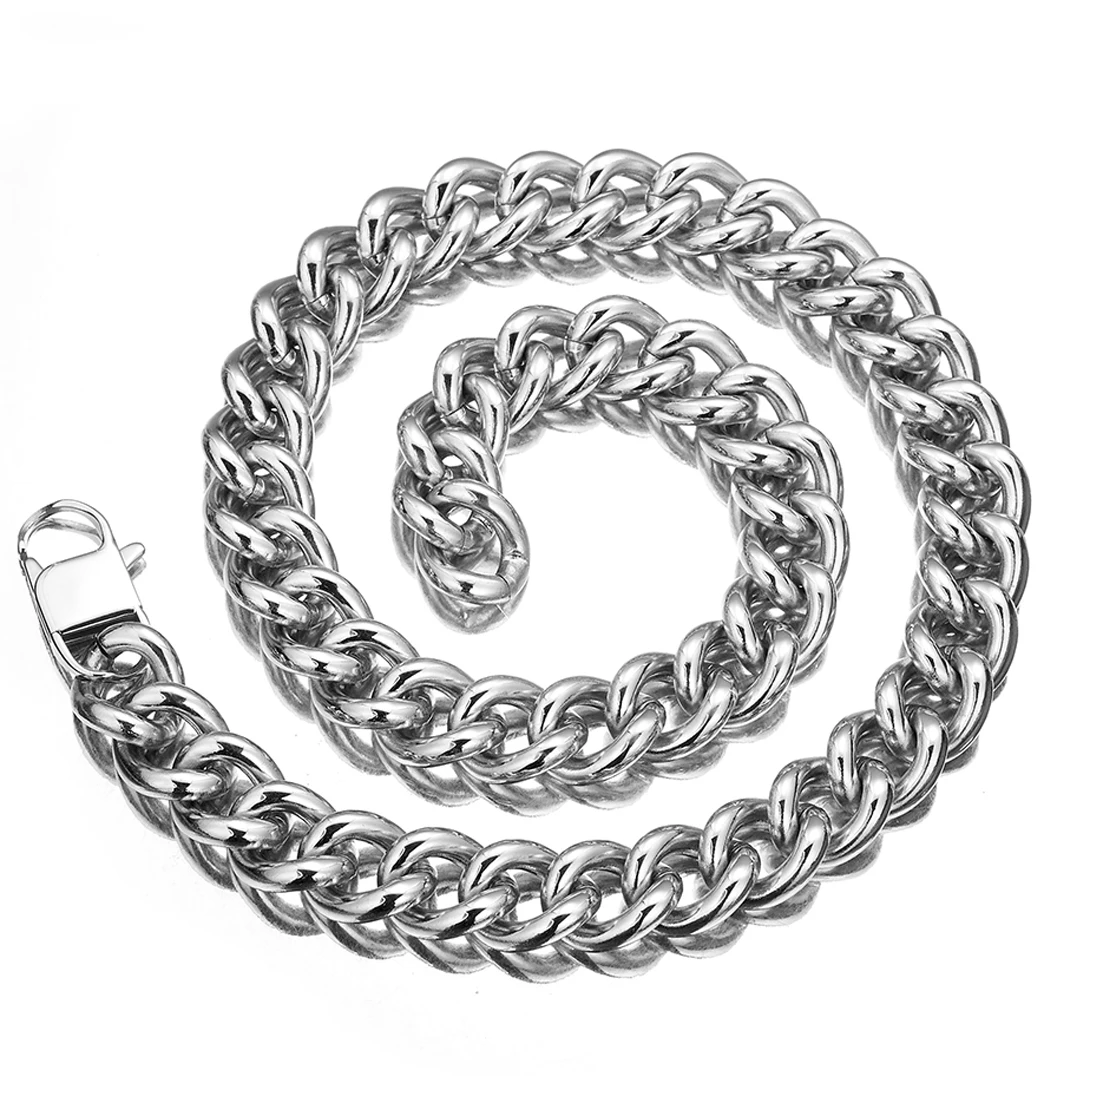 

9/11mm Wide Punk Men Boys 316L Stainless Steel Silver Color Curb Cuban Link Chain Necklace Jewelry Gifts